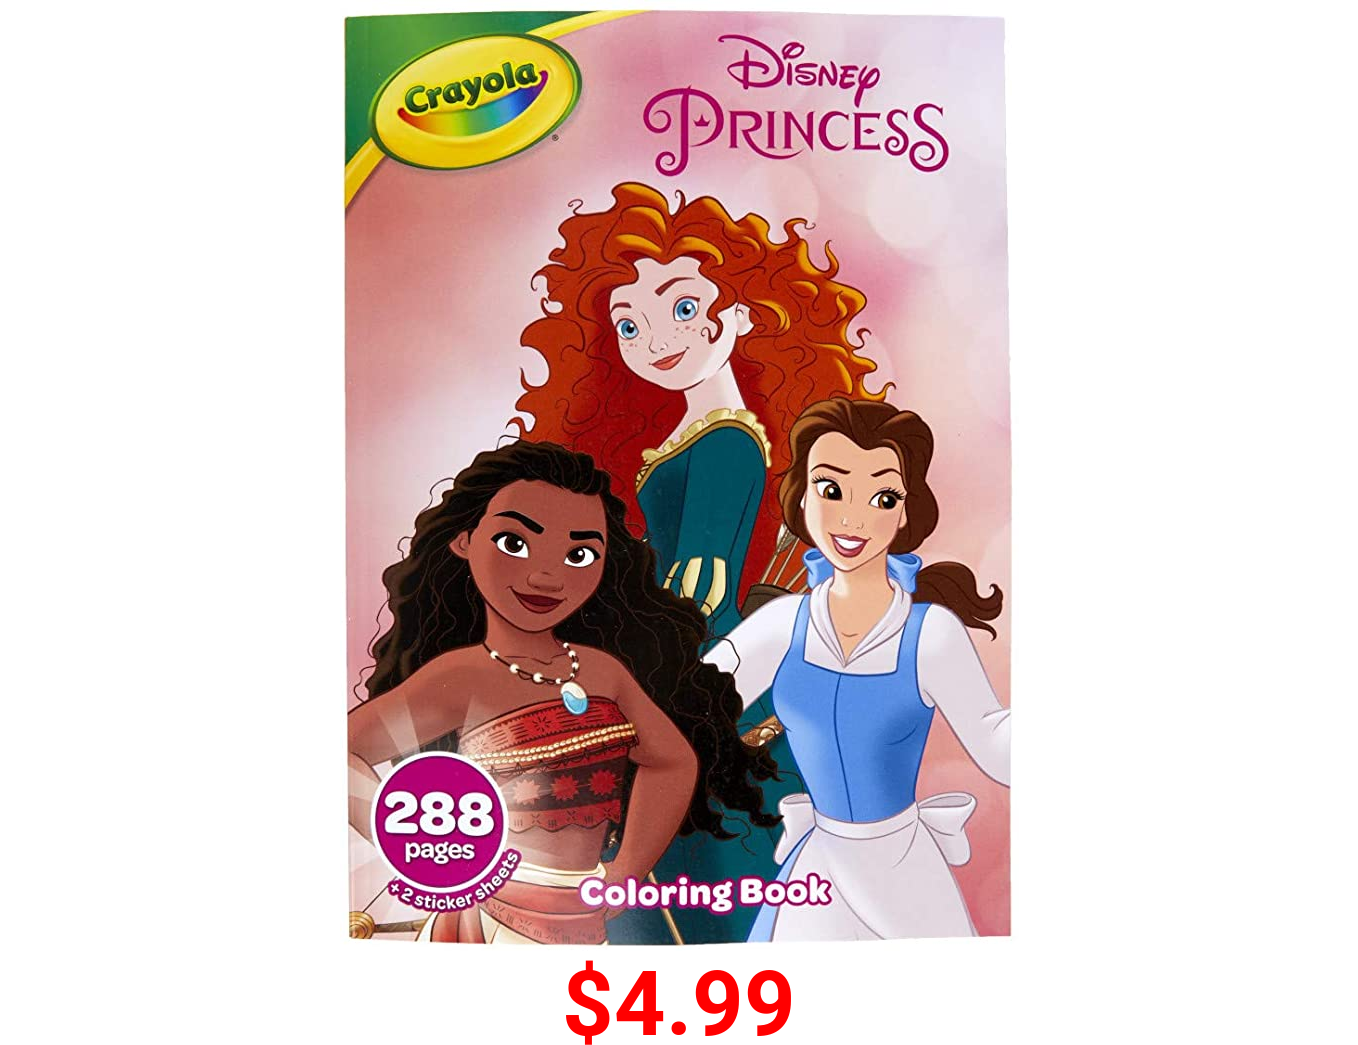 Crayola Disney Princess Coloring Book with Stickers, Gift for Kids, 288 Pages, Ages 3, 4, 5, 6